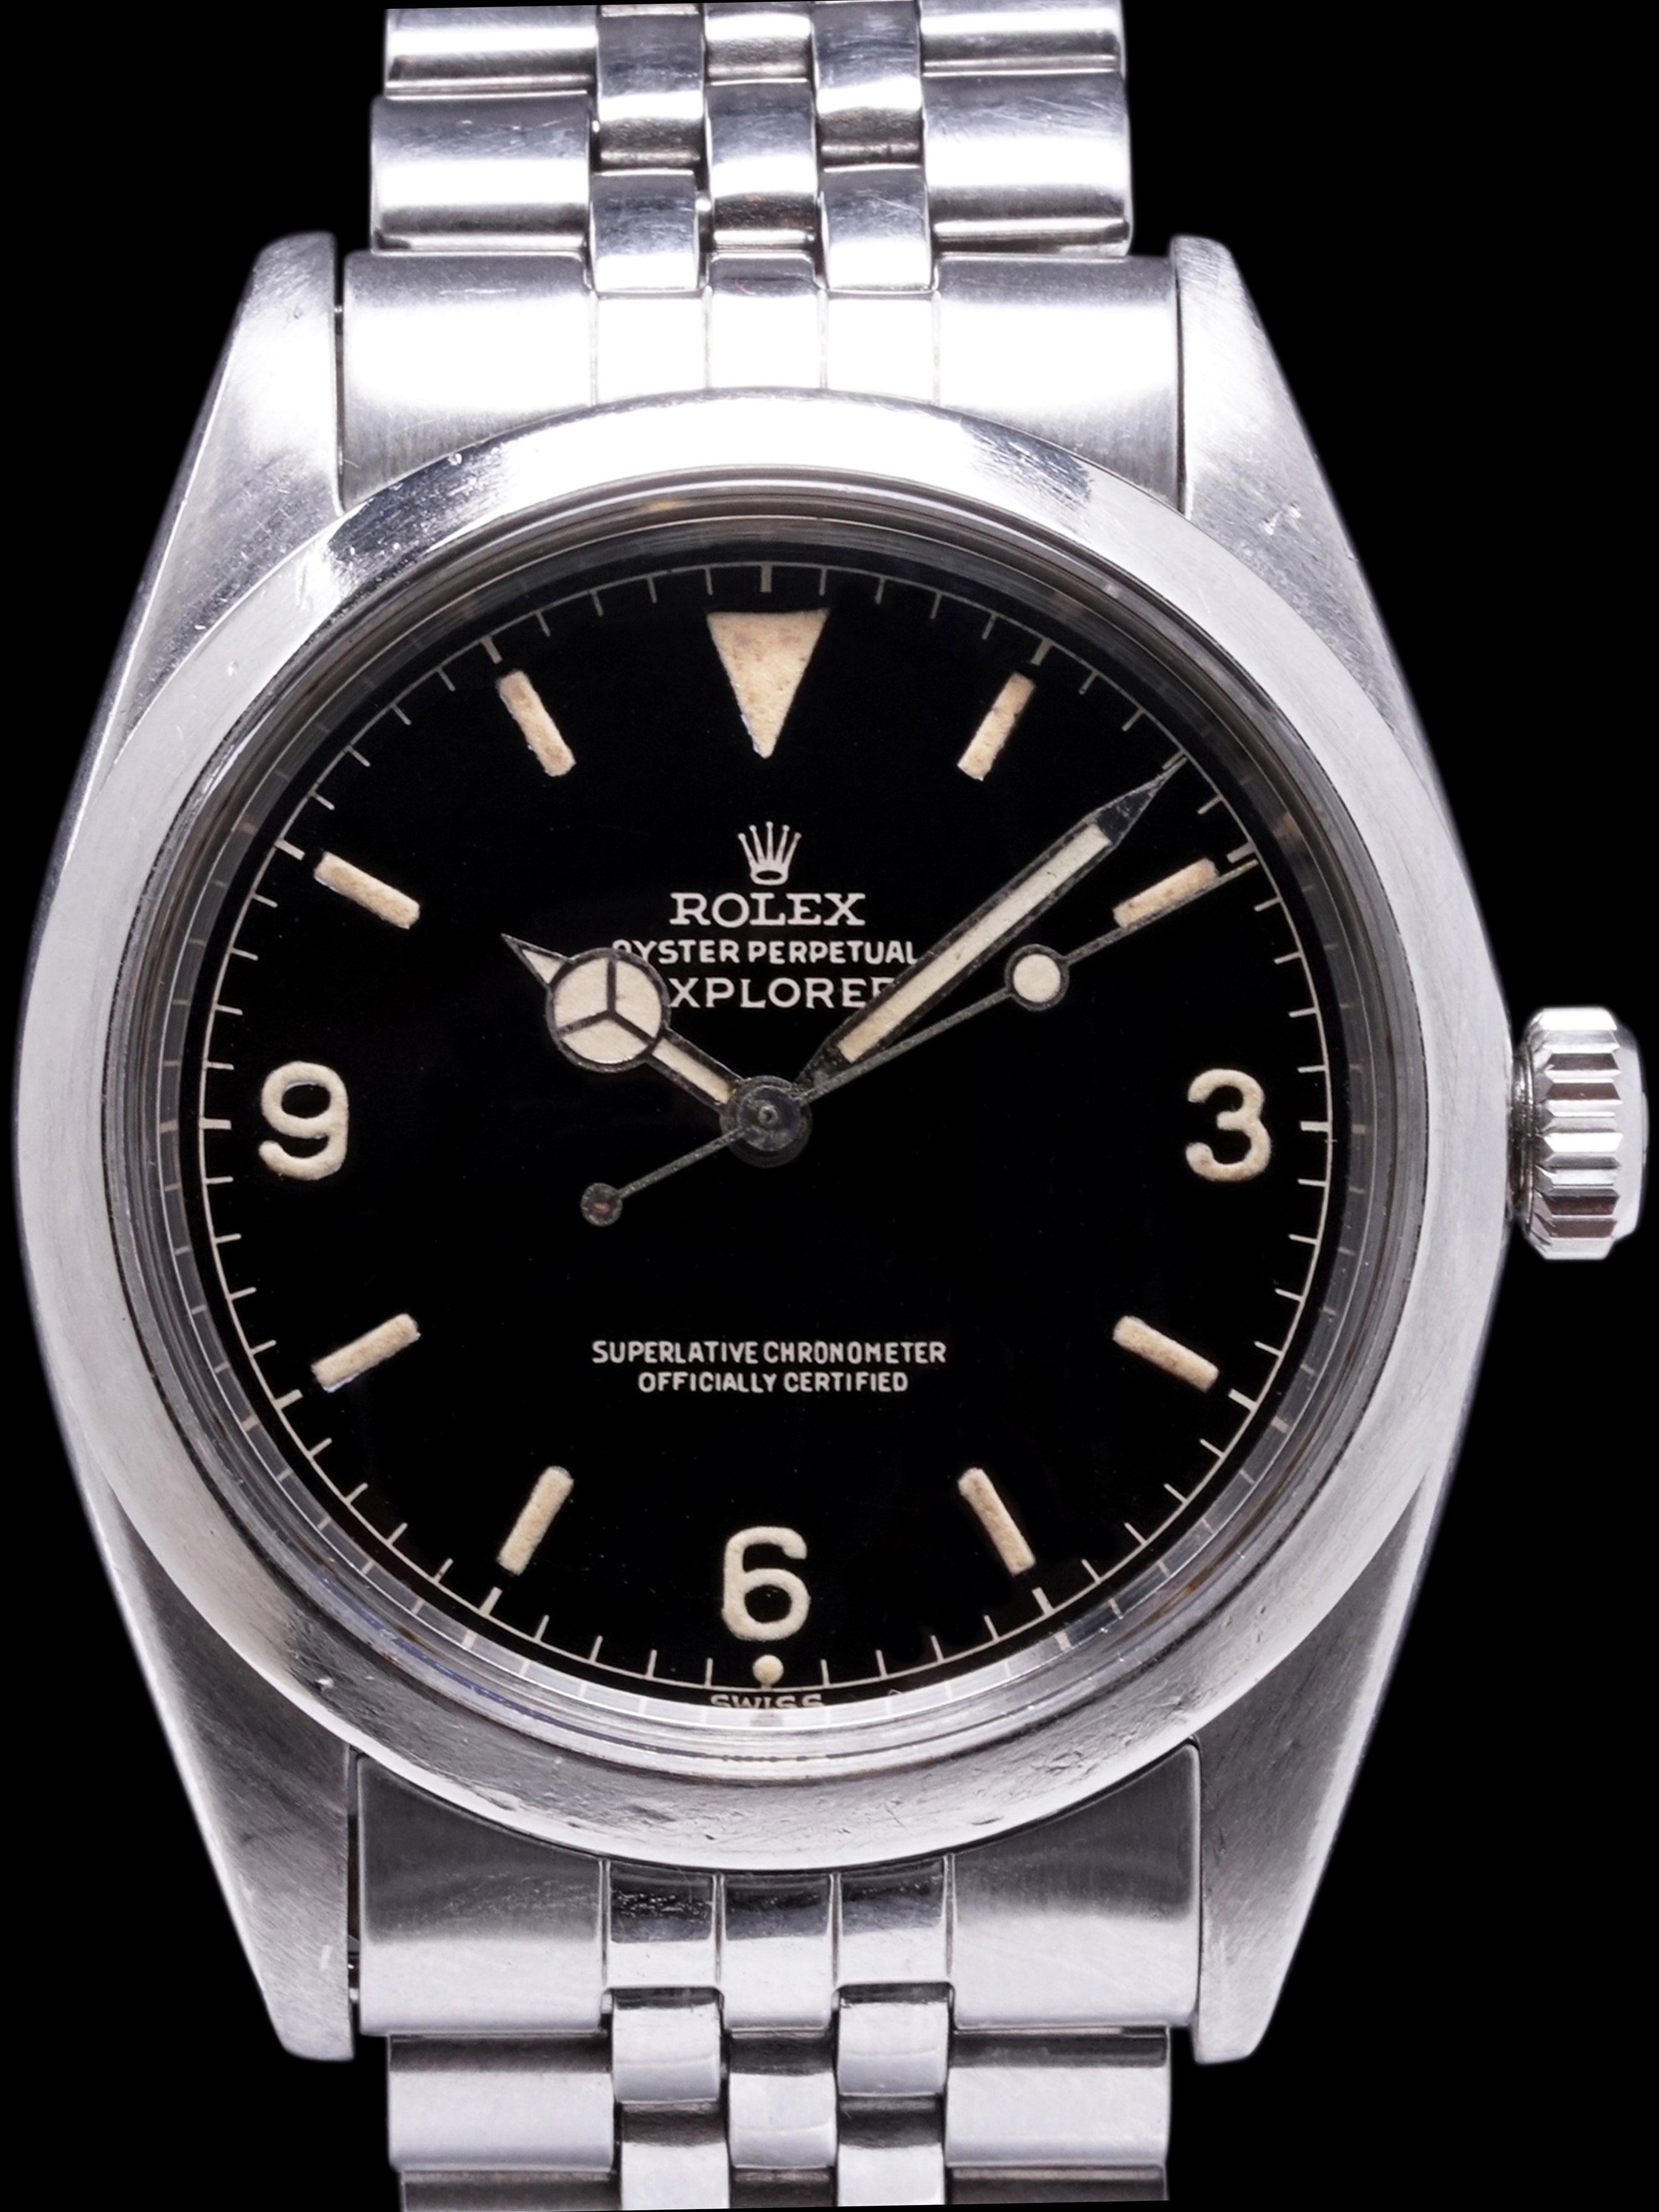 1963 Rolex Explorer I (Ref. 1016) "SWISS only" Chapter Ring Exclamation Dial